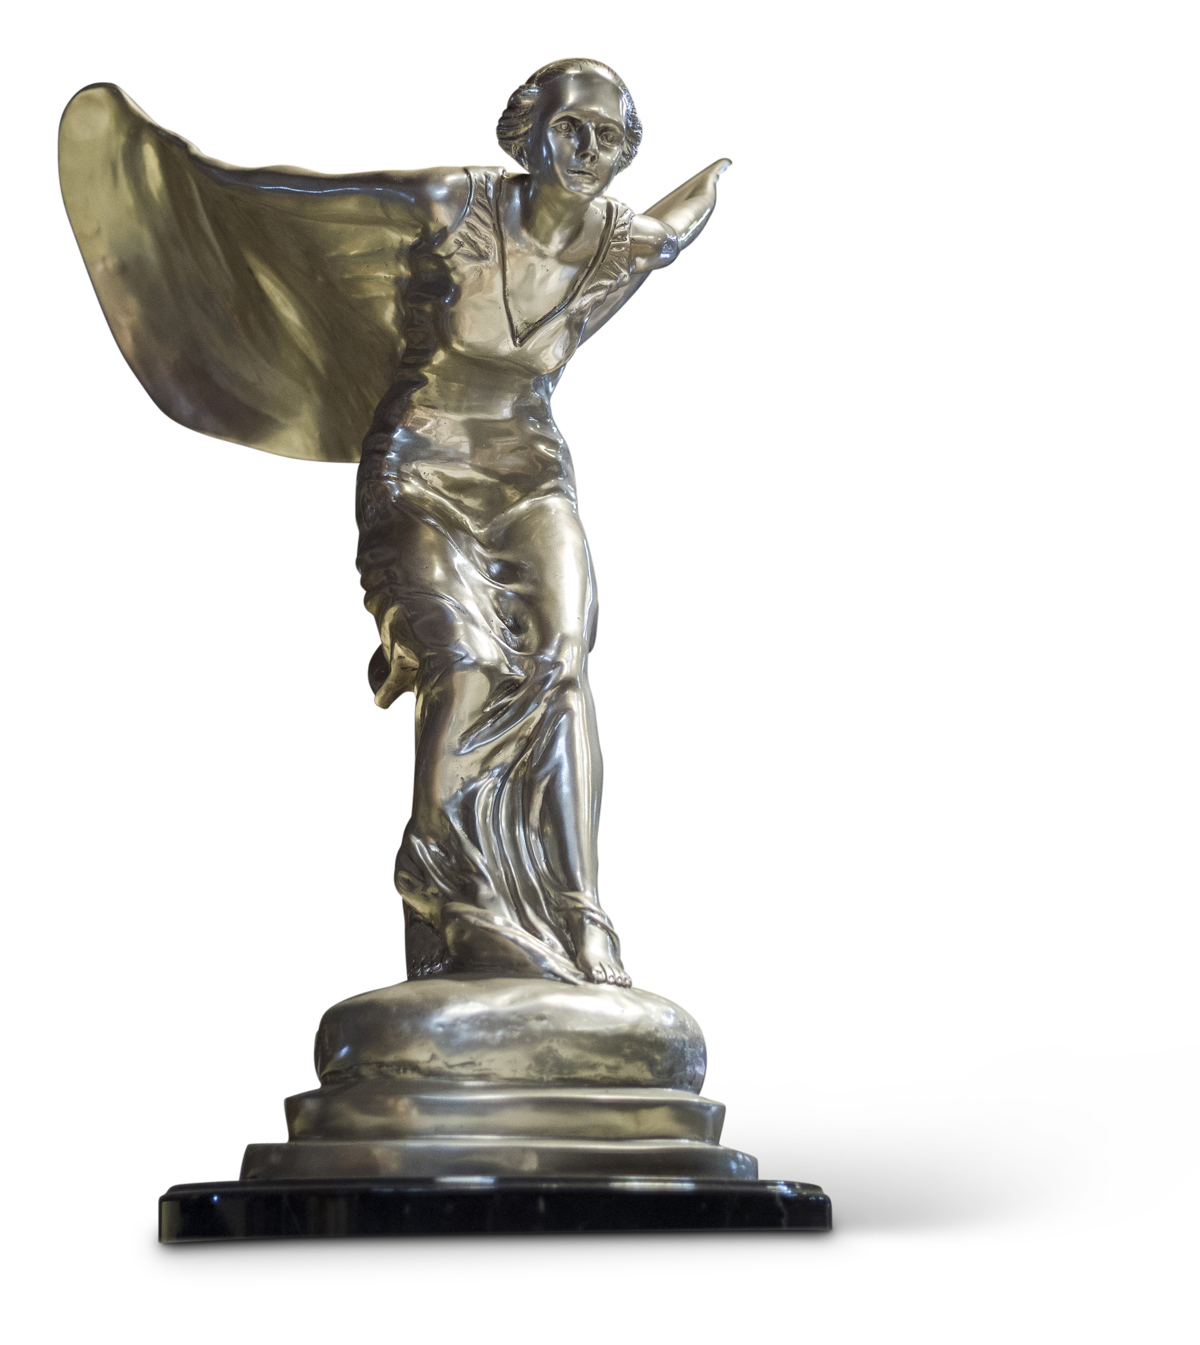 Rolls-Royce Spirit of Ecstasy Reproduction Dealership Display offered at RM Sotheby's The Mitosinka Collection online auction 